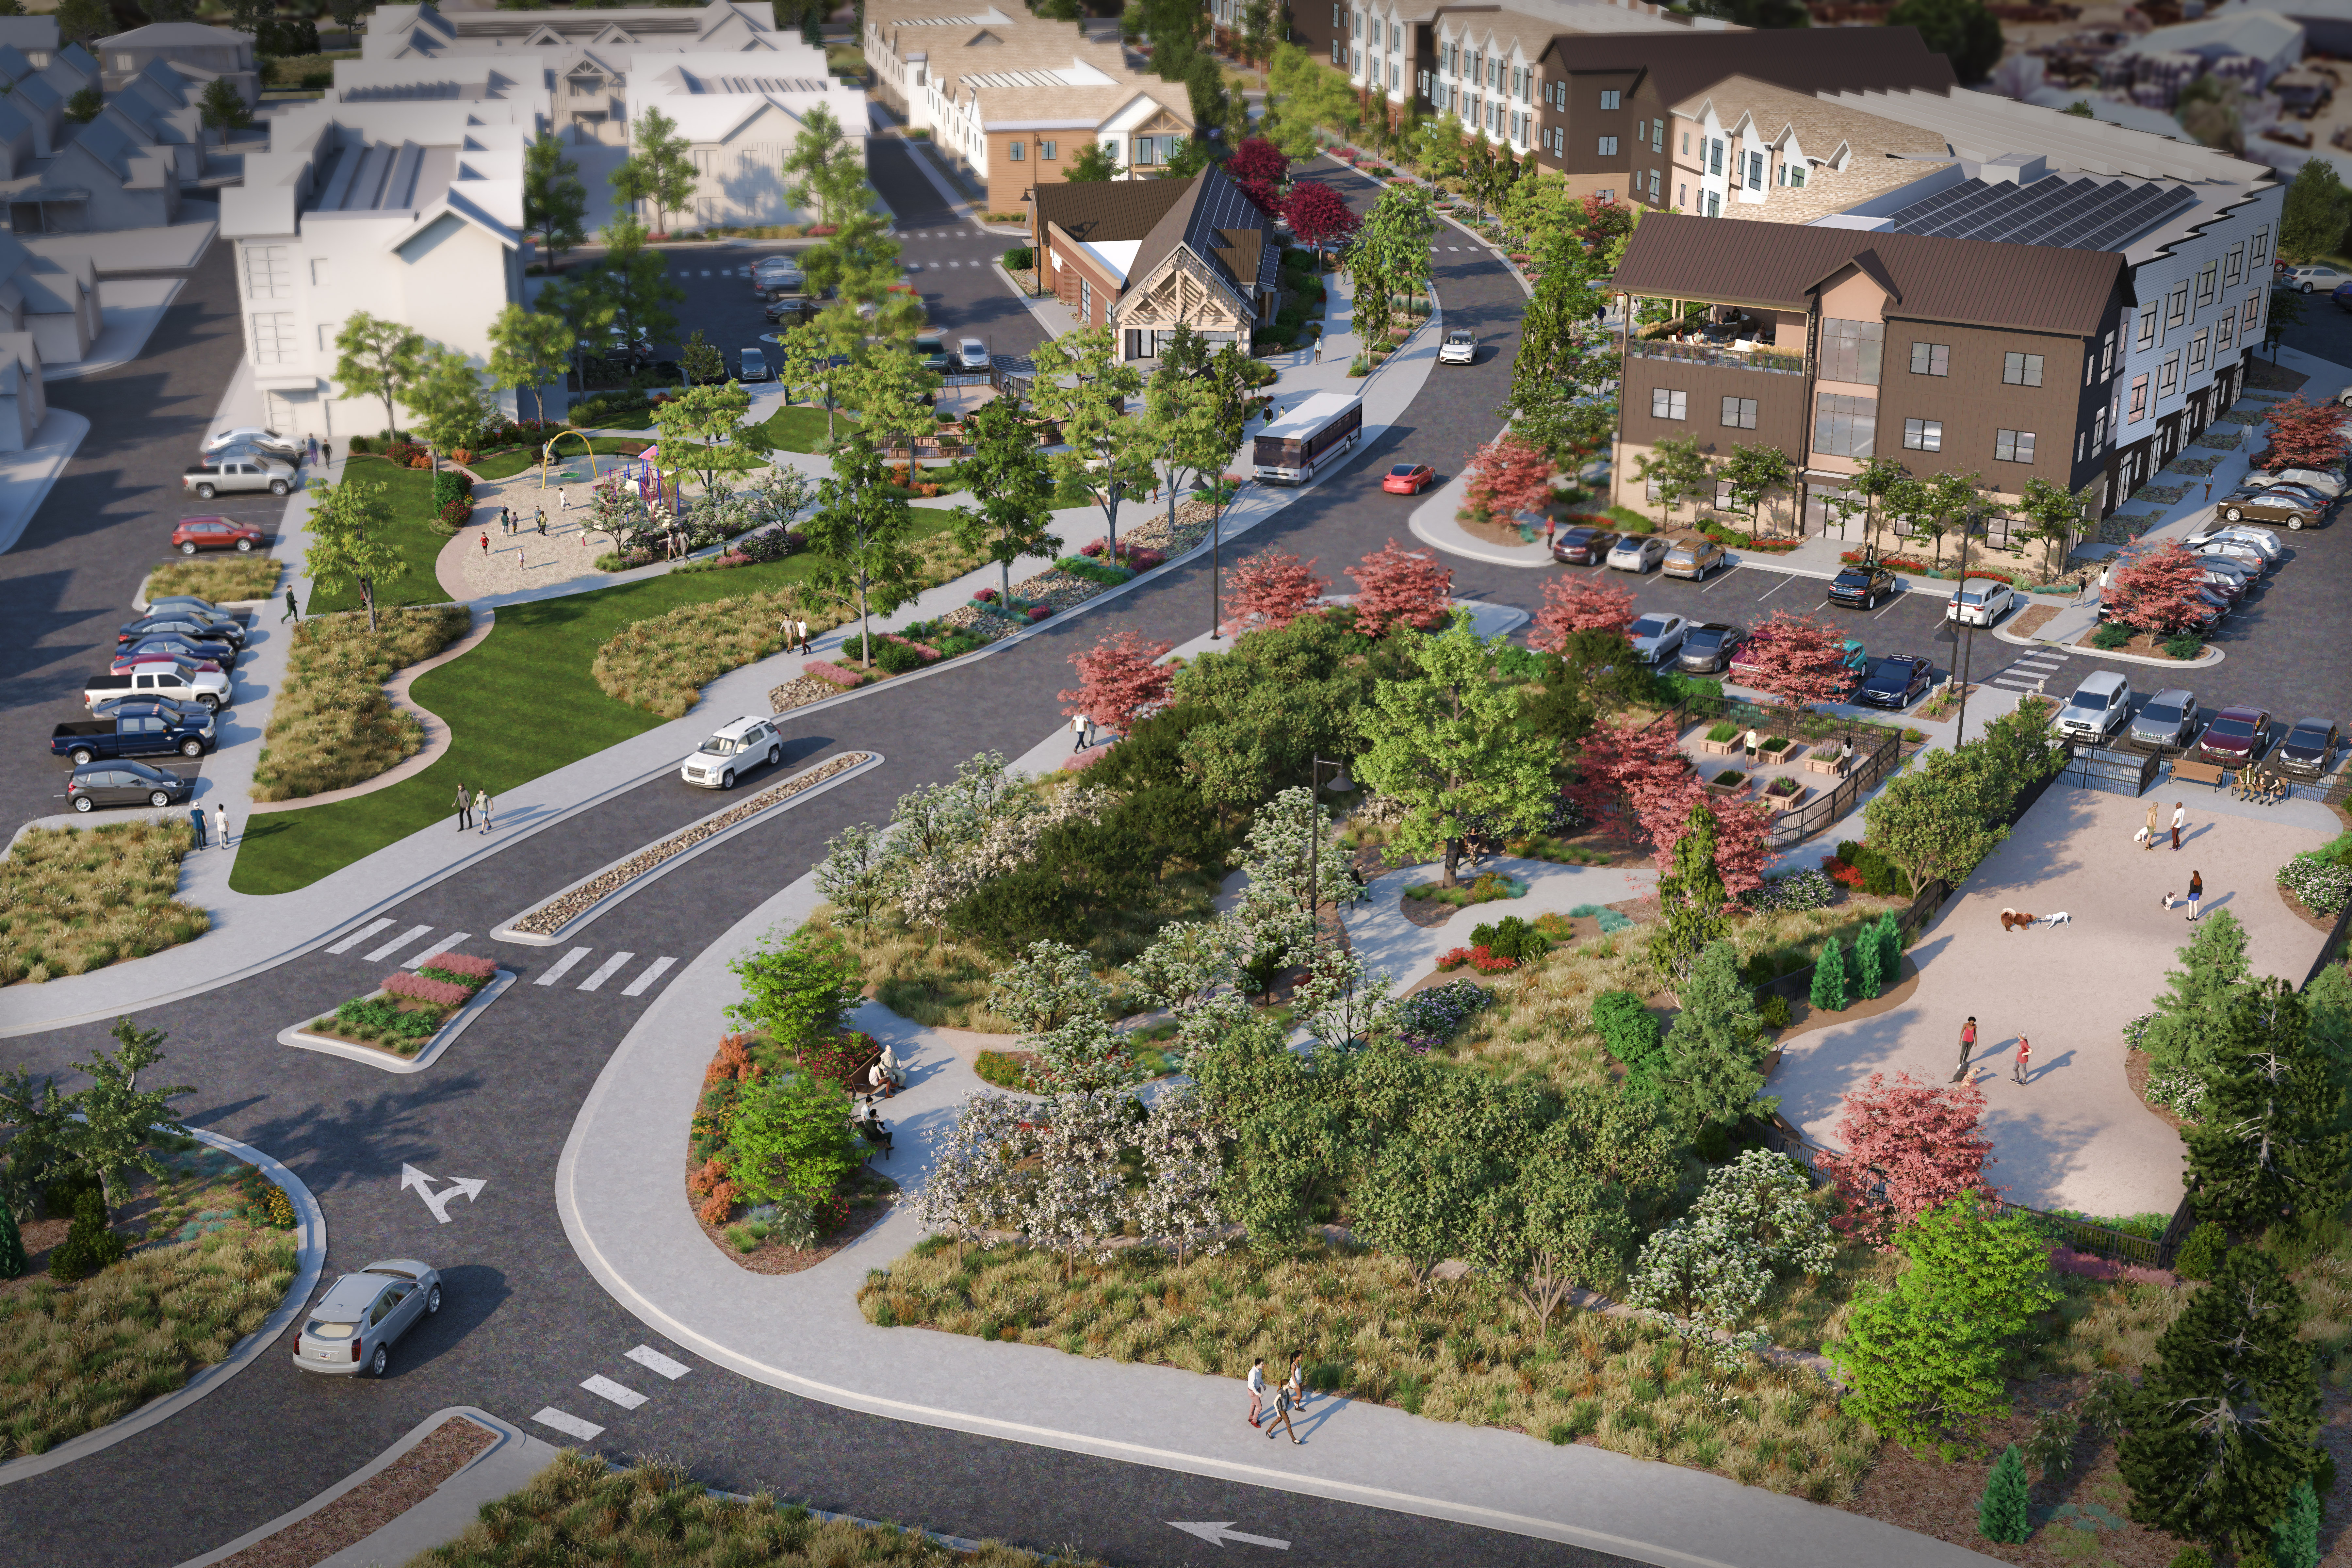 A rendering of the Willoughby Corner development featuring a park and open areas surrounded by housing.